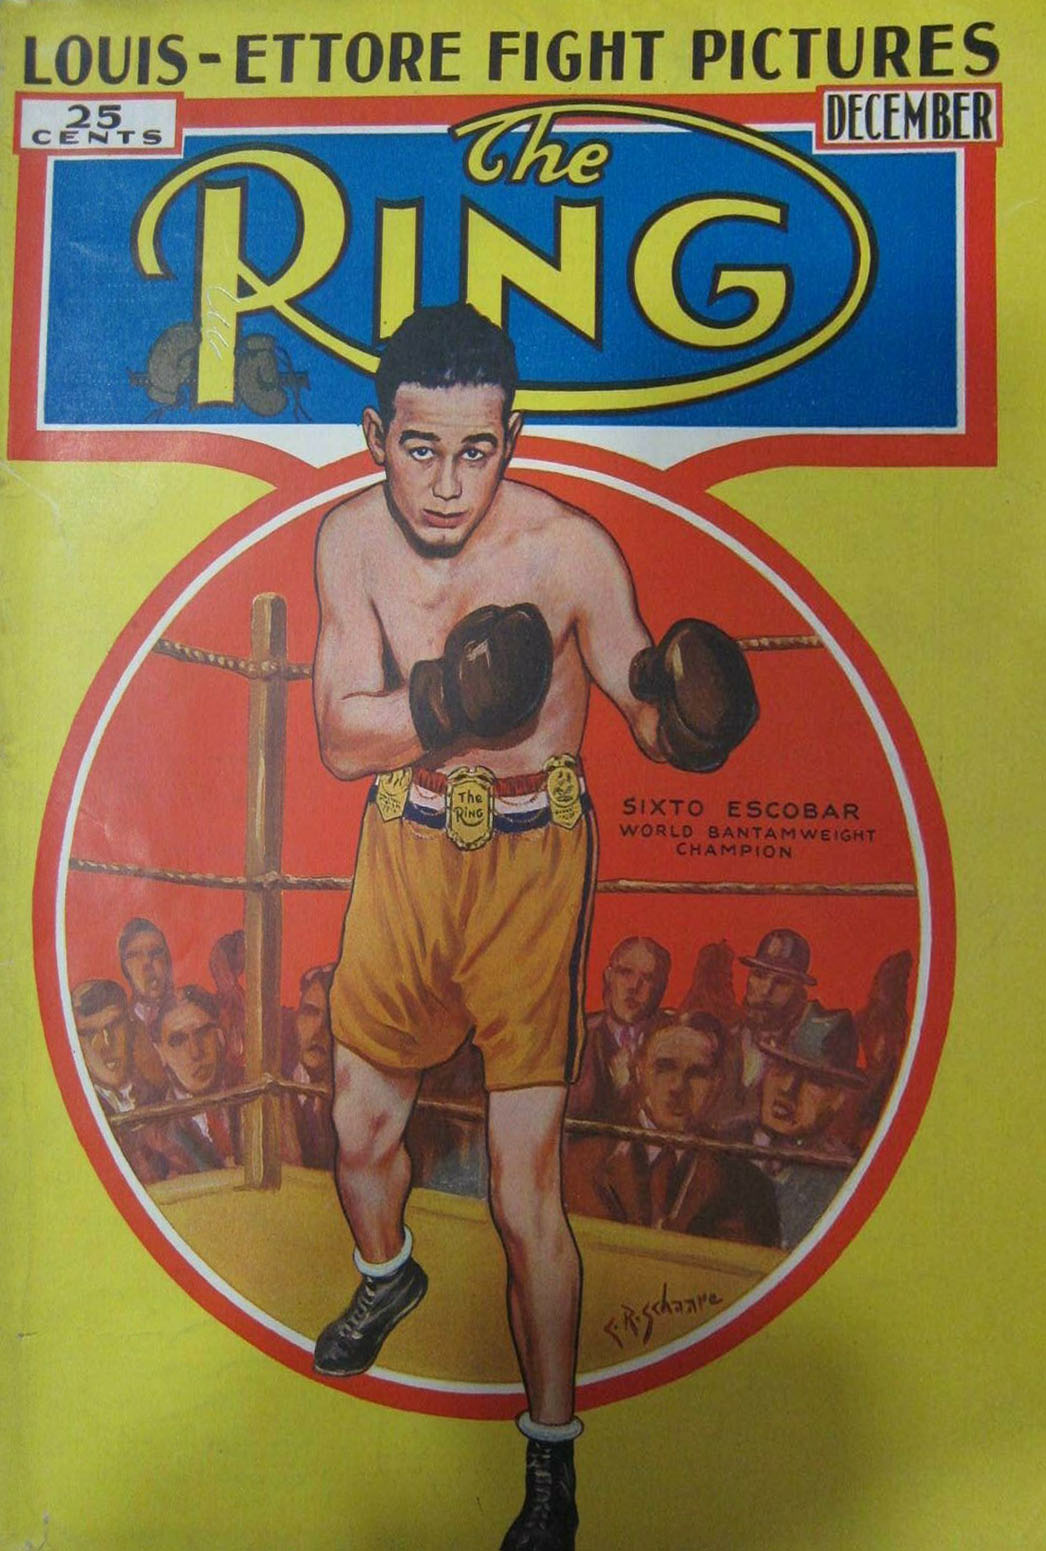 Ring, The December 1936, Ring, The December 1936 American boxing magazine back issue first published in 1922 by Sports & Entertainment Publications.  Louis - Ettore Fight Pictures., Louis - Ettore Fight Pictures